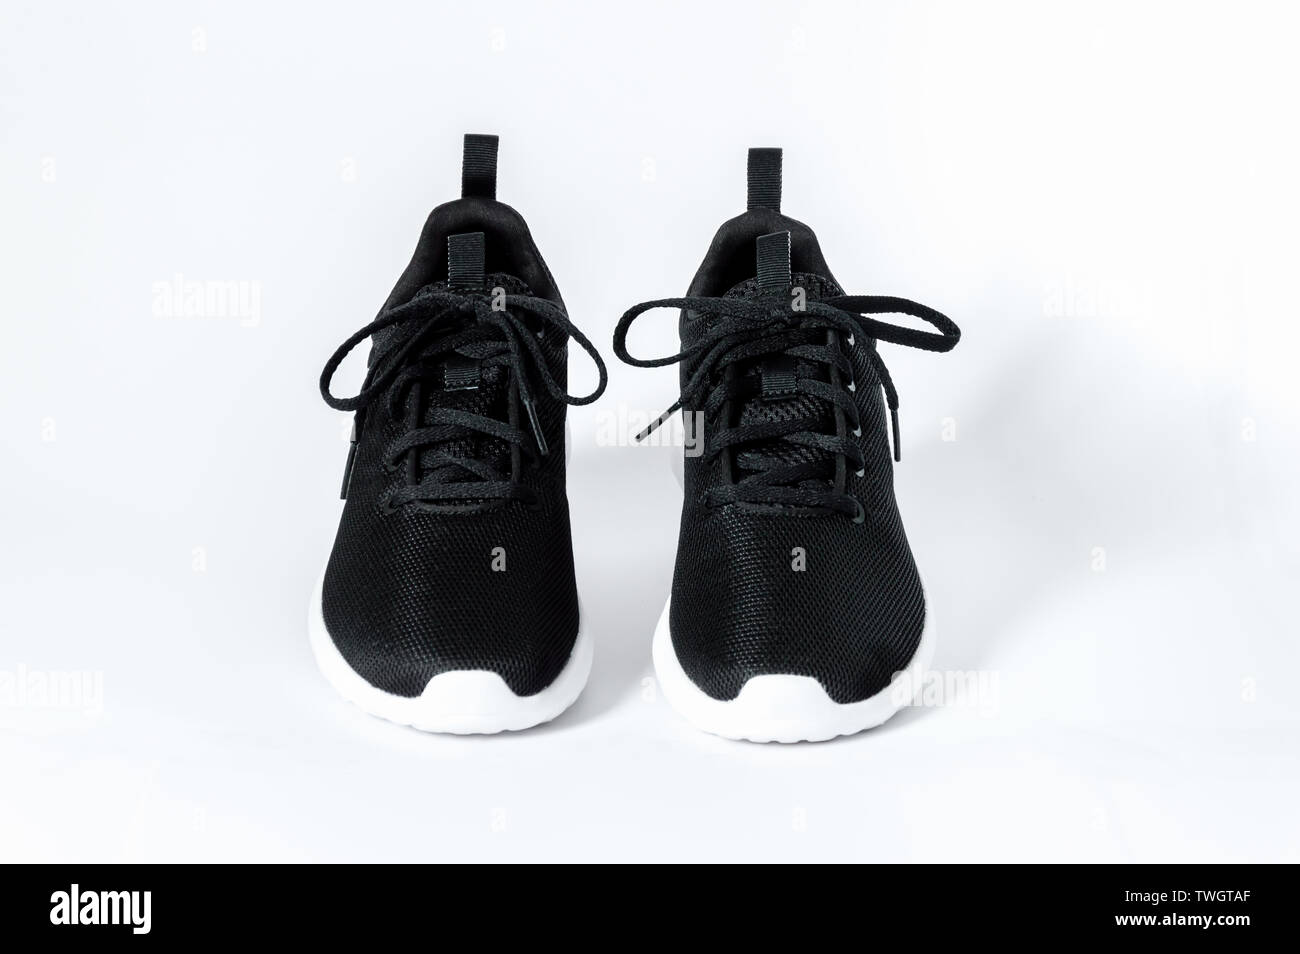 Black sports running shoes with white sole isolated on white background,  front view. Concept of fitness and healthy lifestyle Stock Photo - Alamy